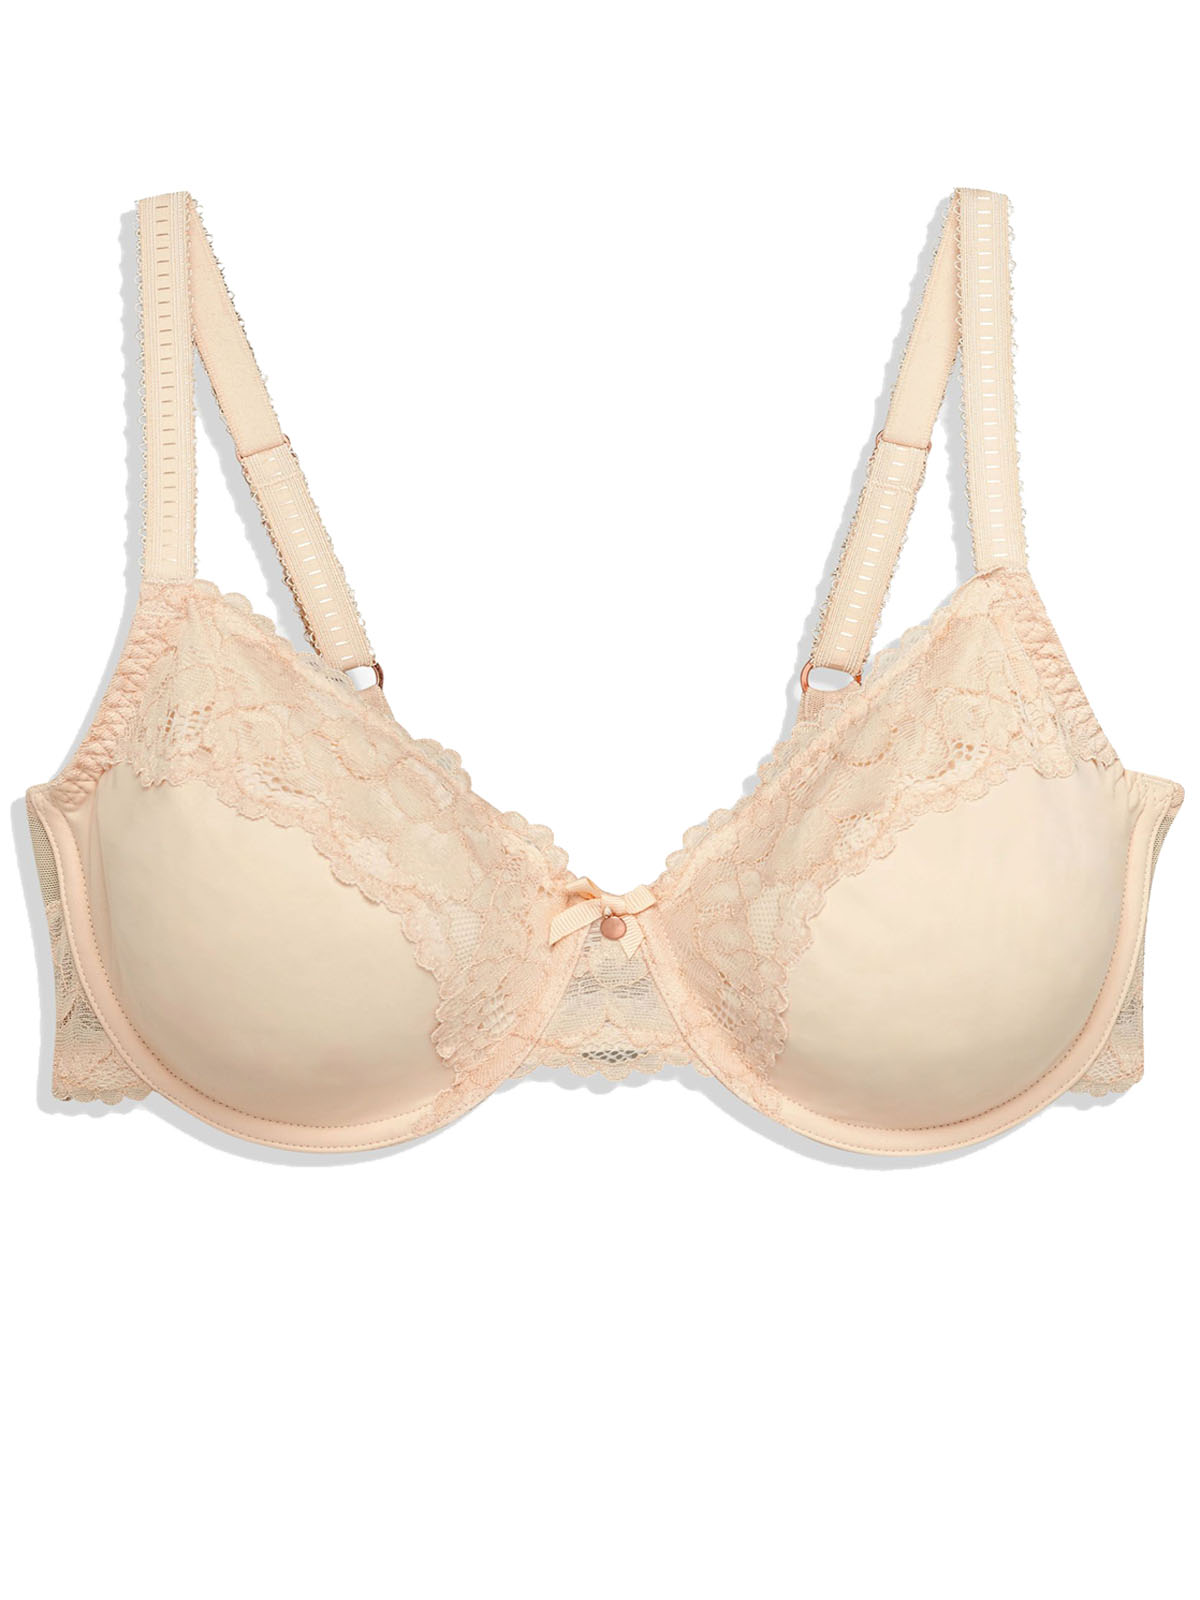 N3XT NUDE Floral Lace Underwired Full Cup Bra Size 38 E F G